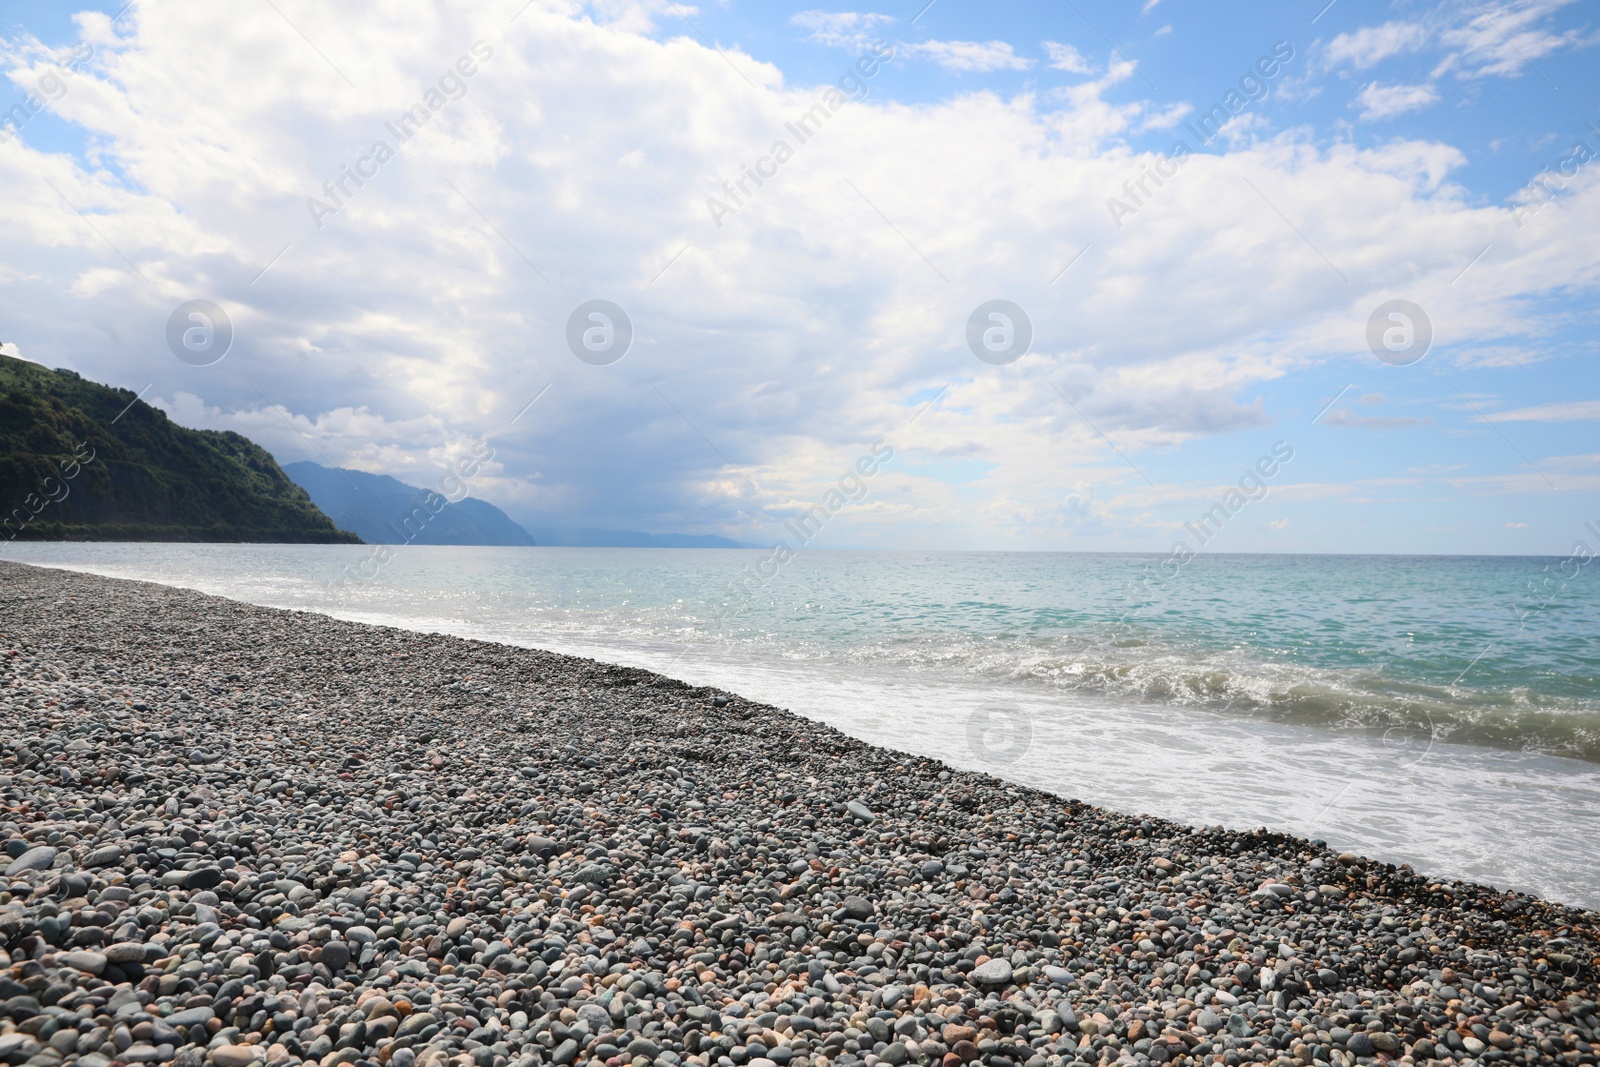 Photo of Picturesque view of beautiful sea shore and hills under sky with fluffy clouds